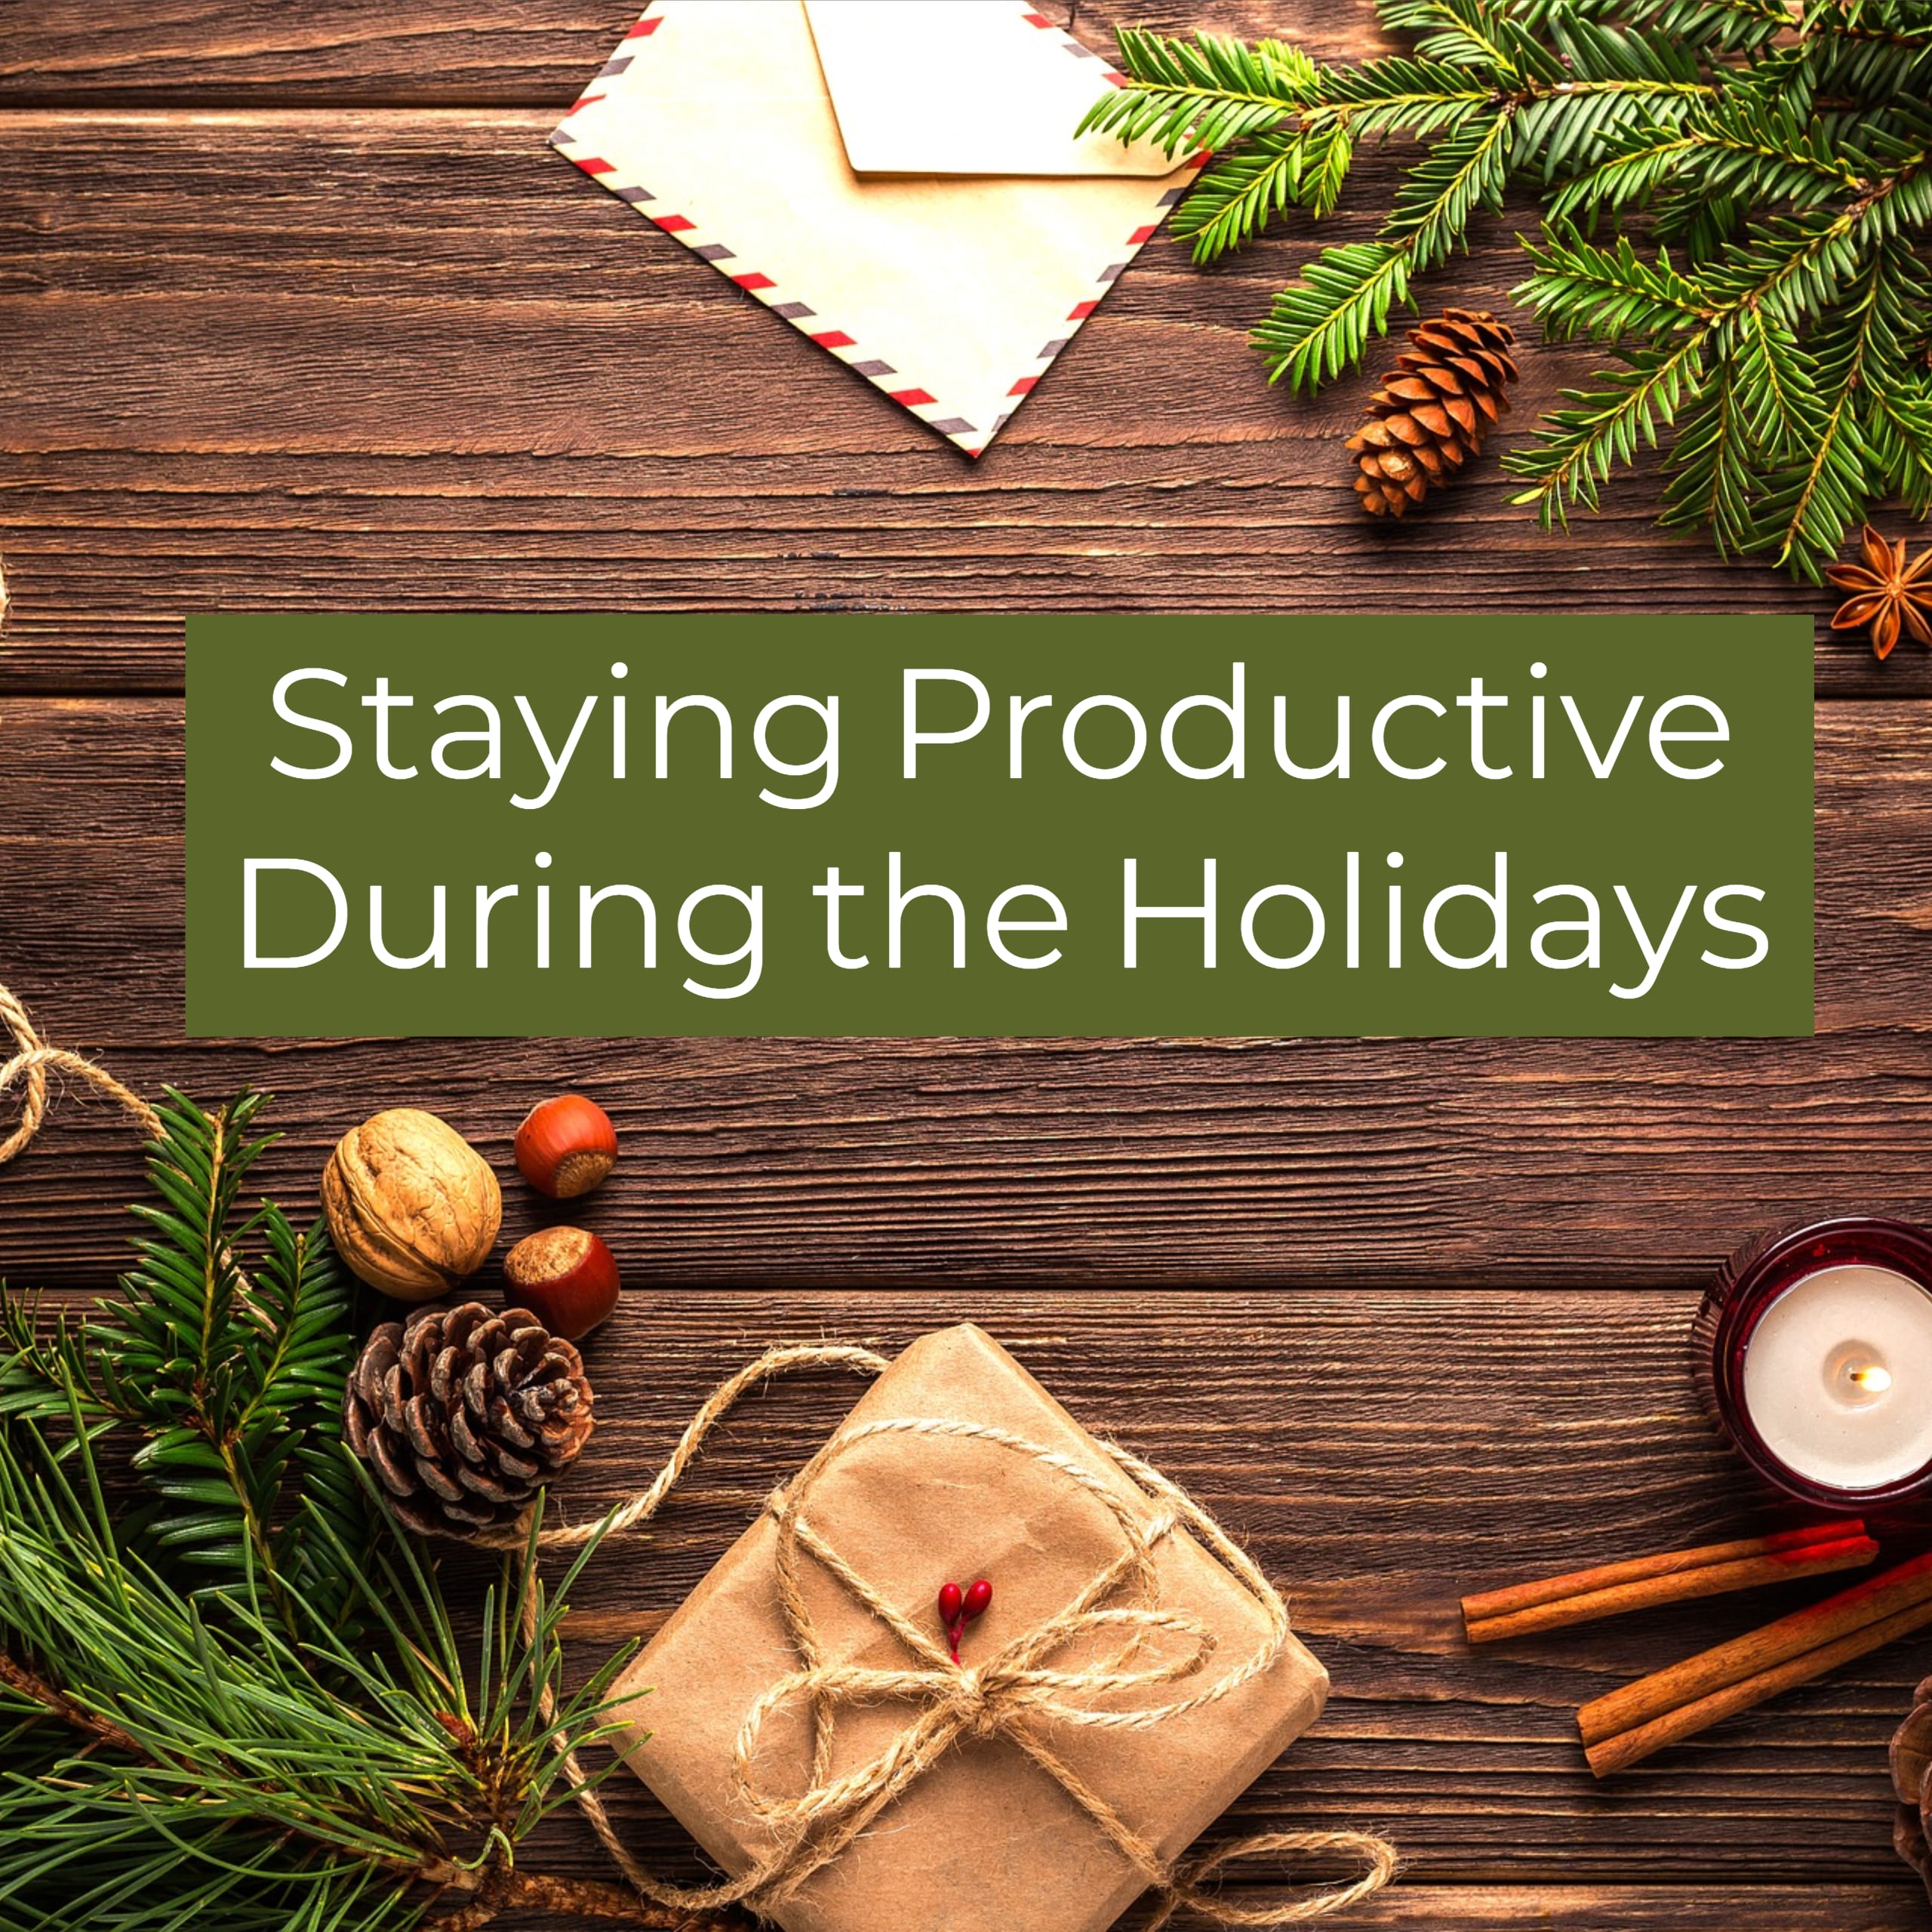 5 Proven Ways To Stay Productive During The Holidays